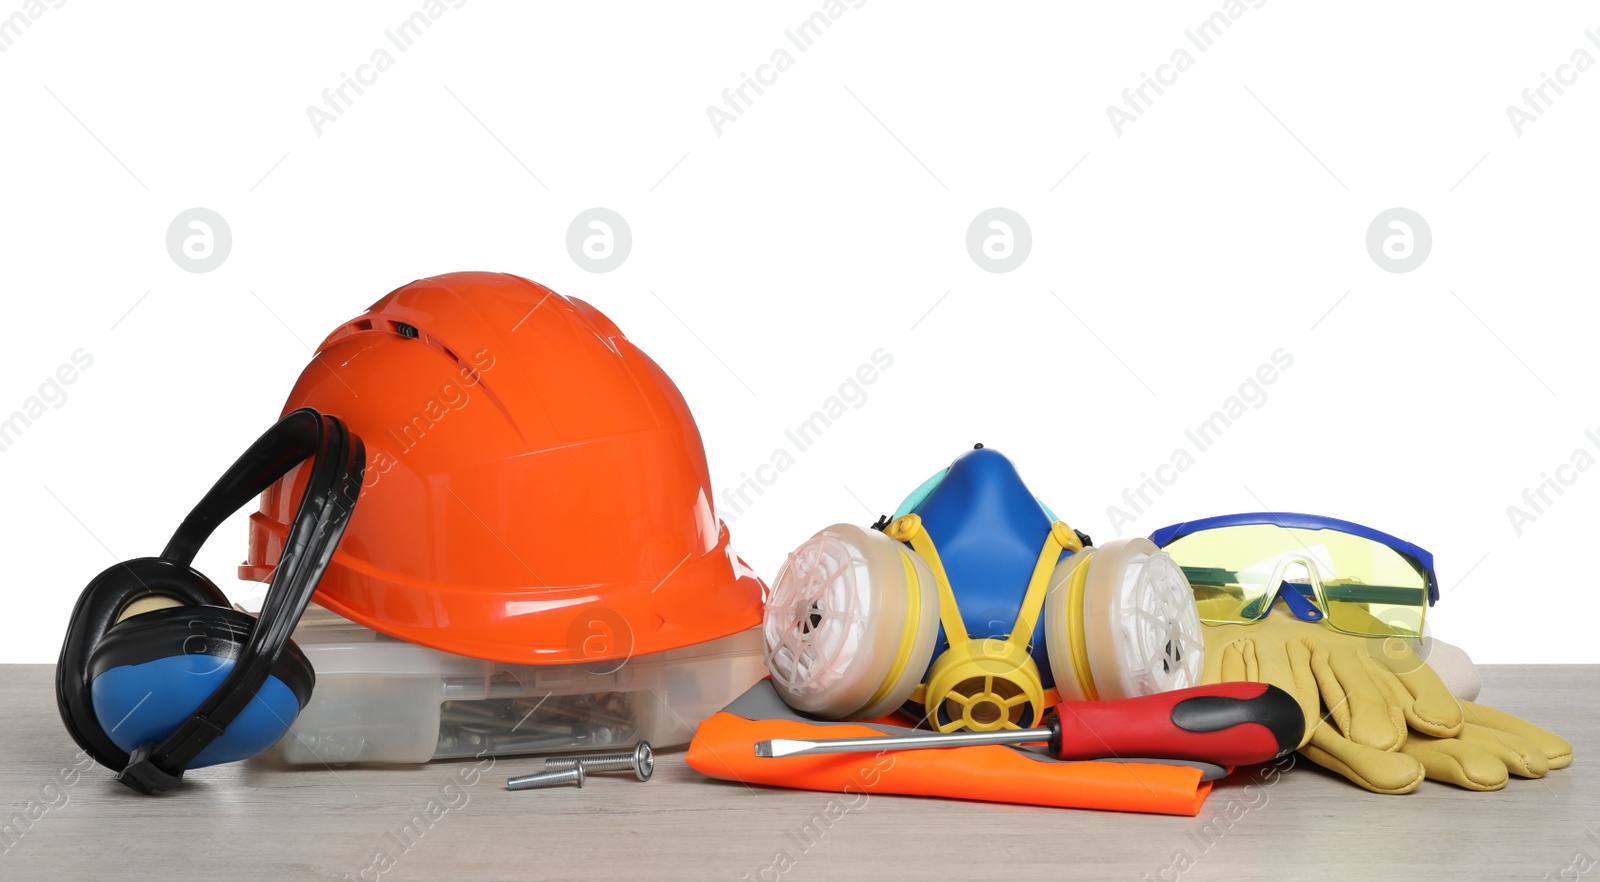 Photo of Set with safety equipment and tools on wooden table against white background